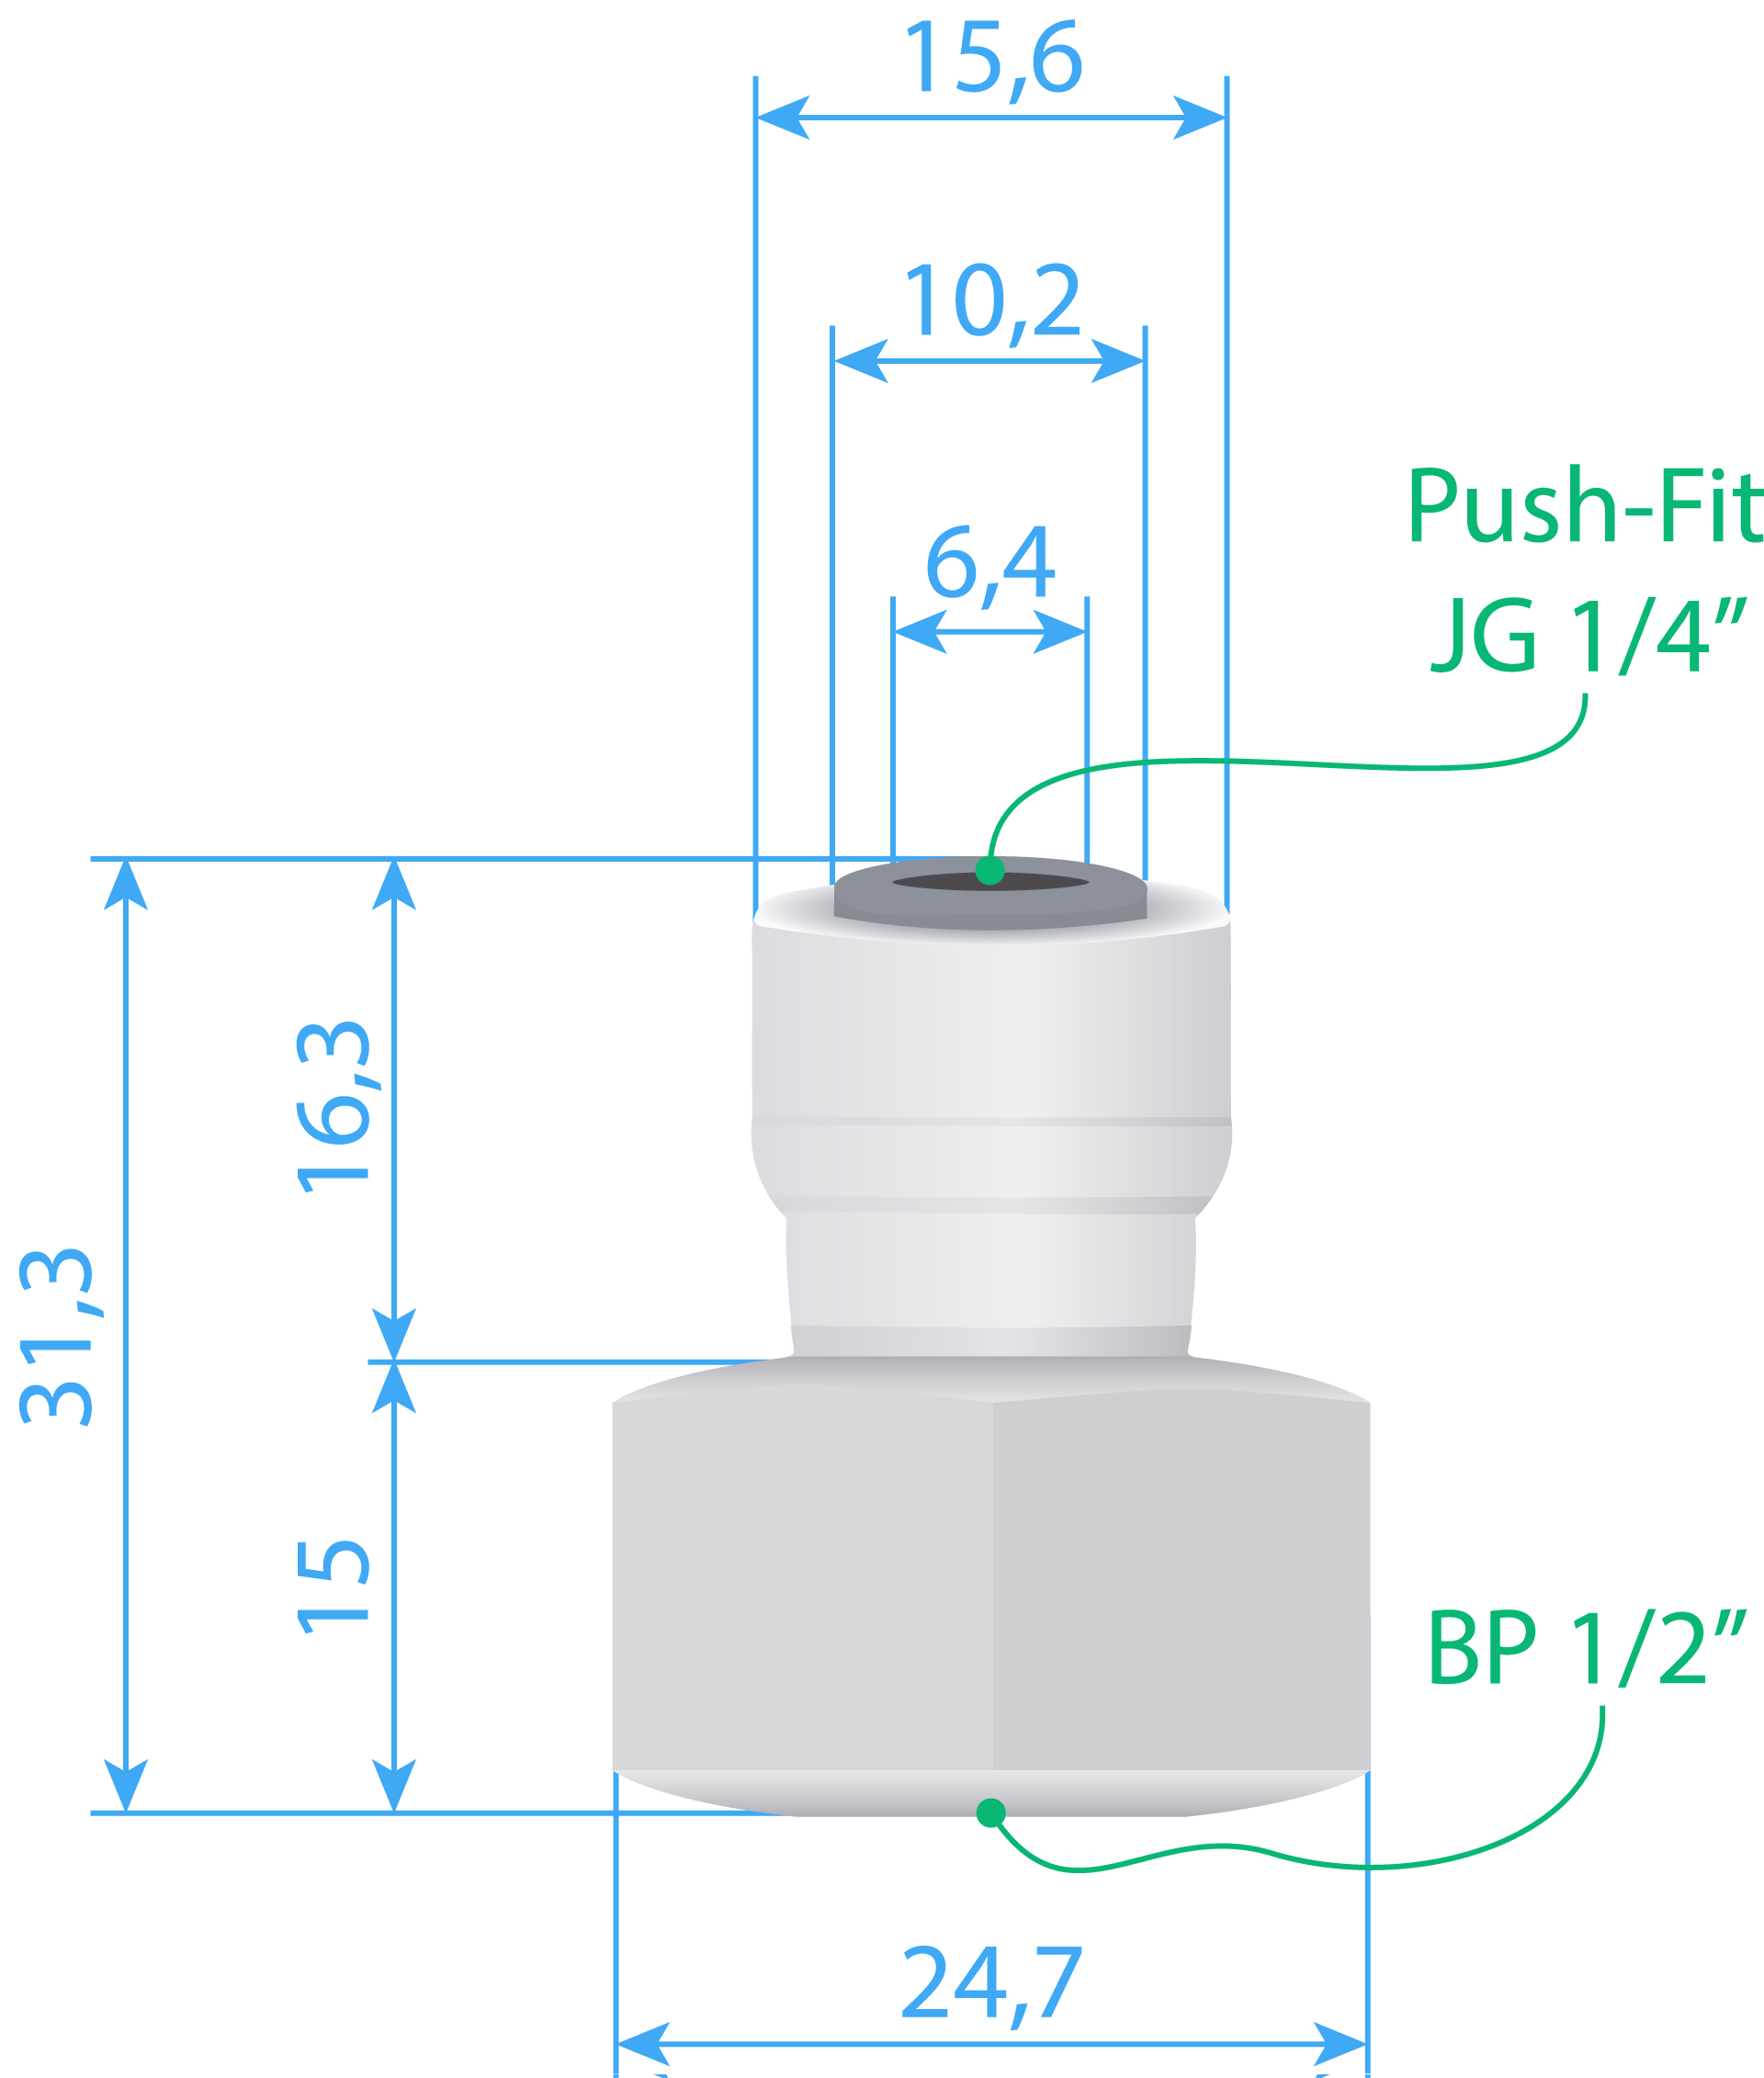 Connector Type-I (PF JG 1/4” – Thead Female 1/2”) Dimensions